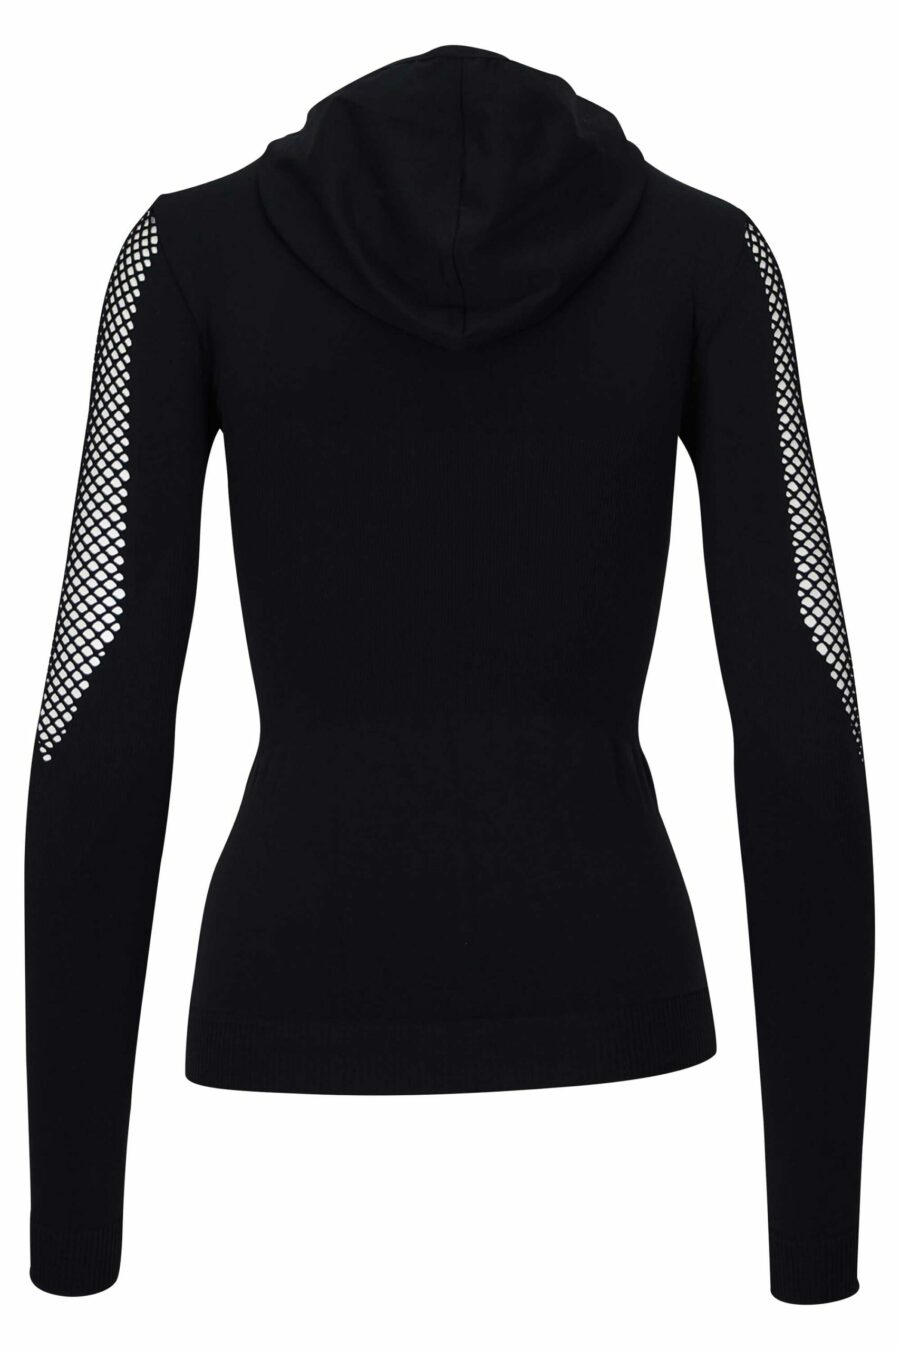 Black sweatshirt with white logo and side mesh - 889316611786 1 scaled